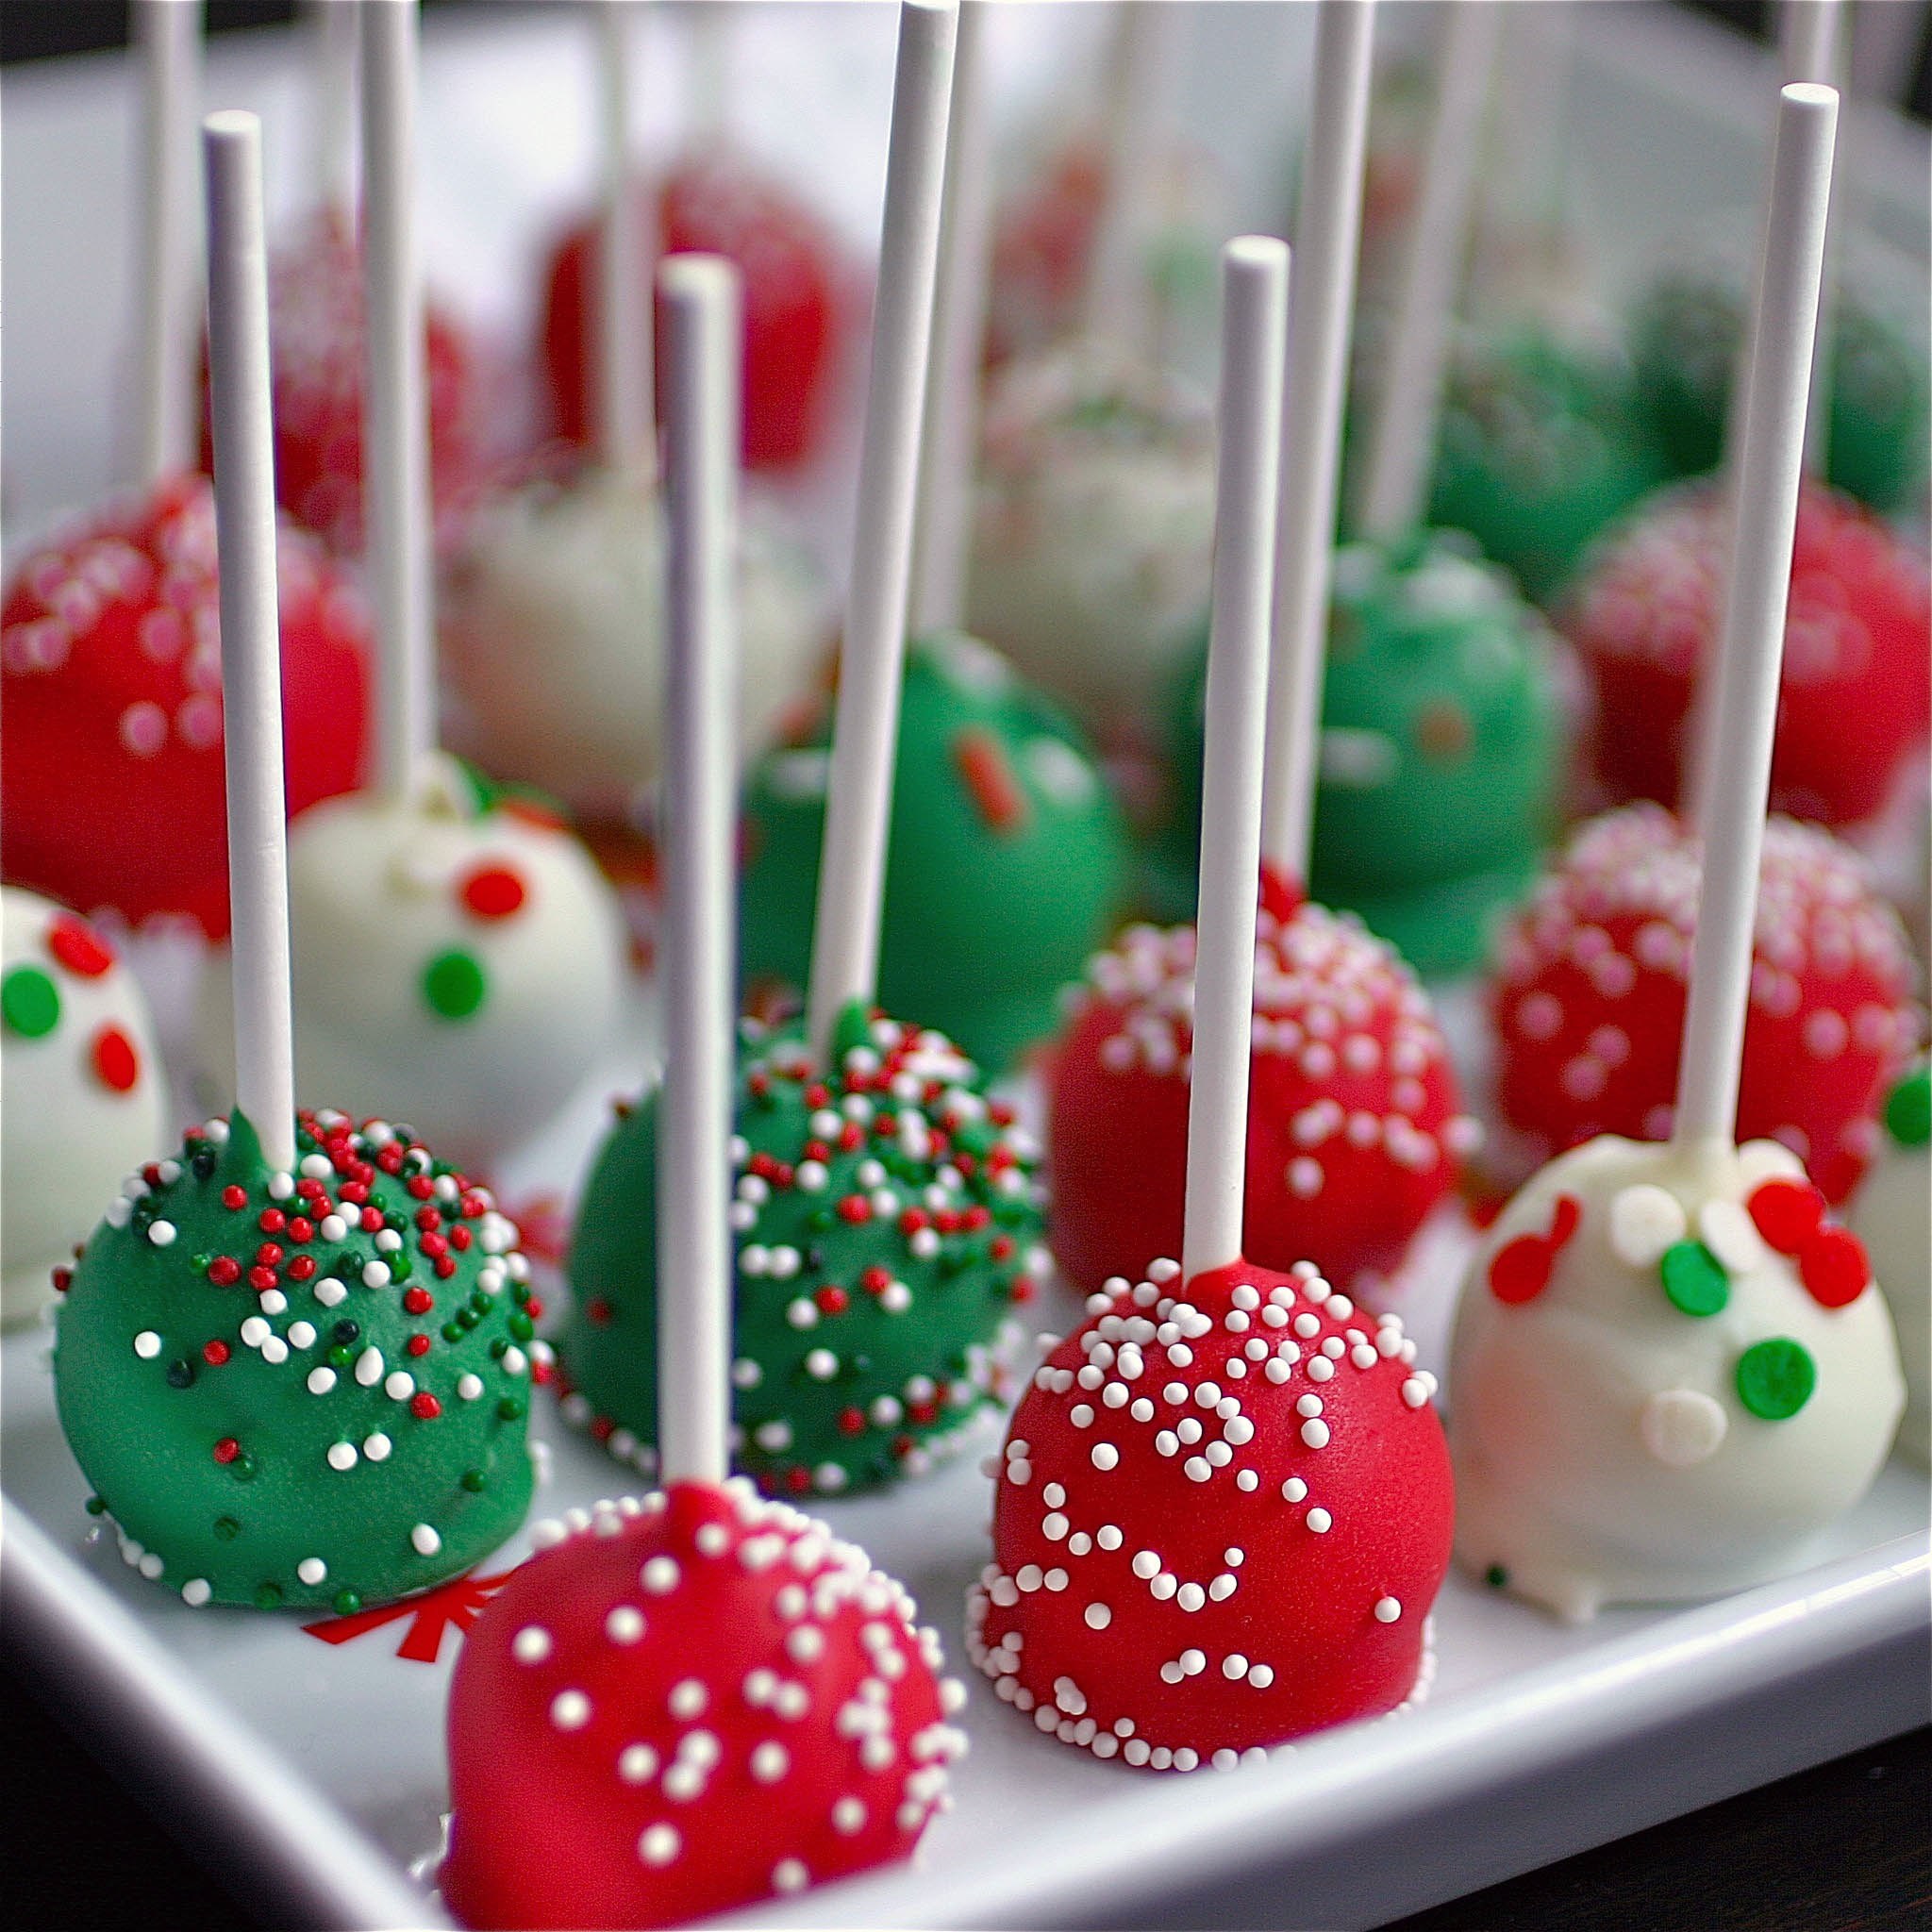 http://deliciouslydeclassified.com/wp-content/uploads/2012/12/cakepoptray.jpg